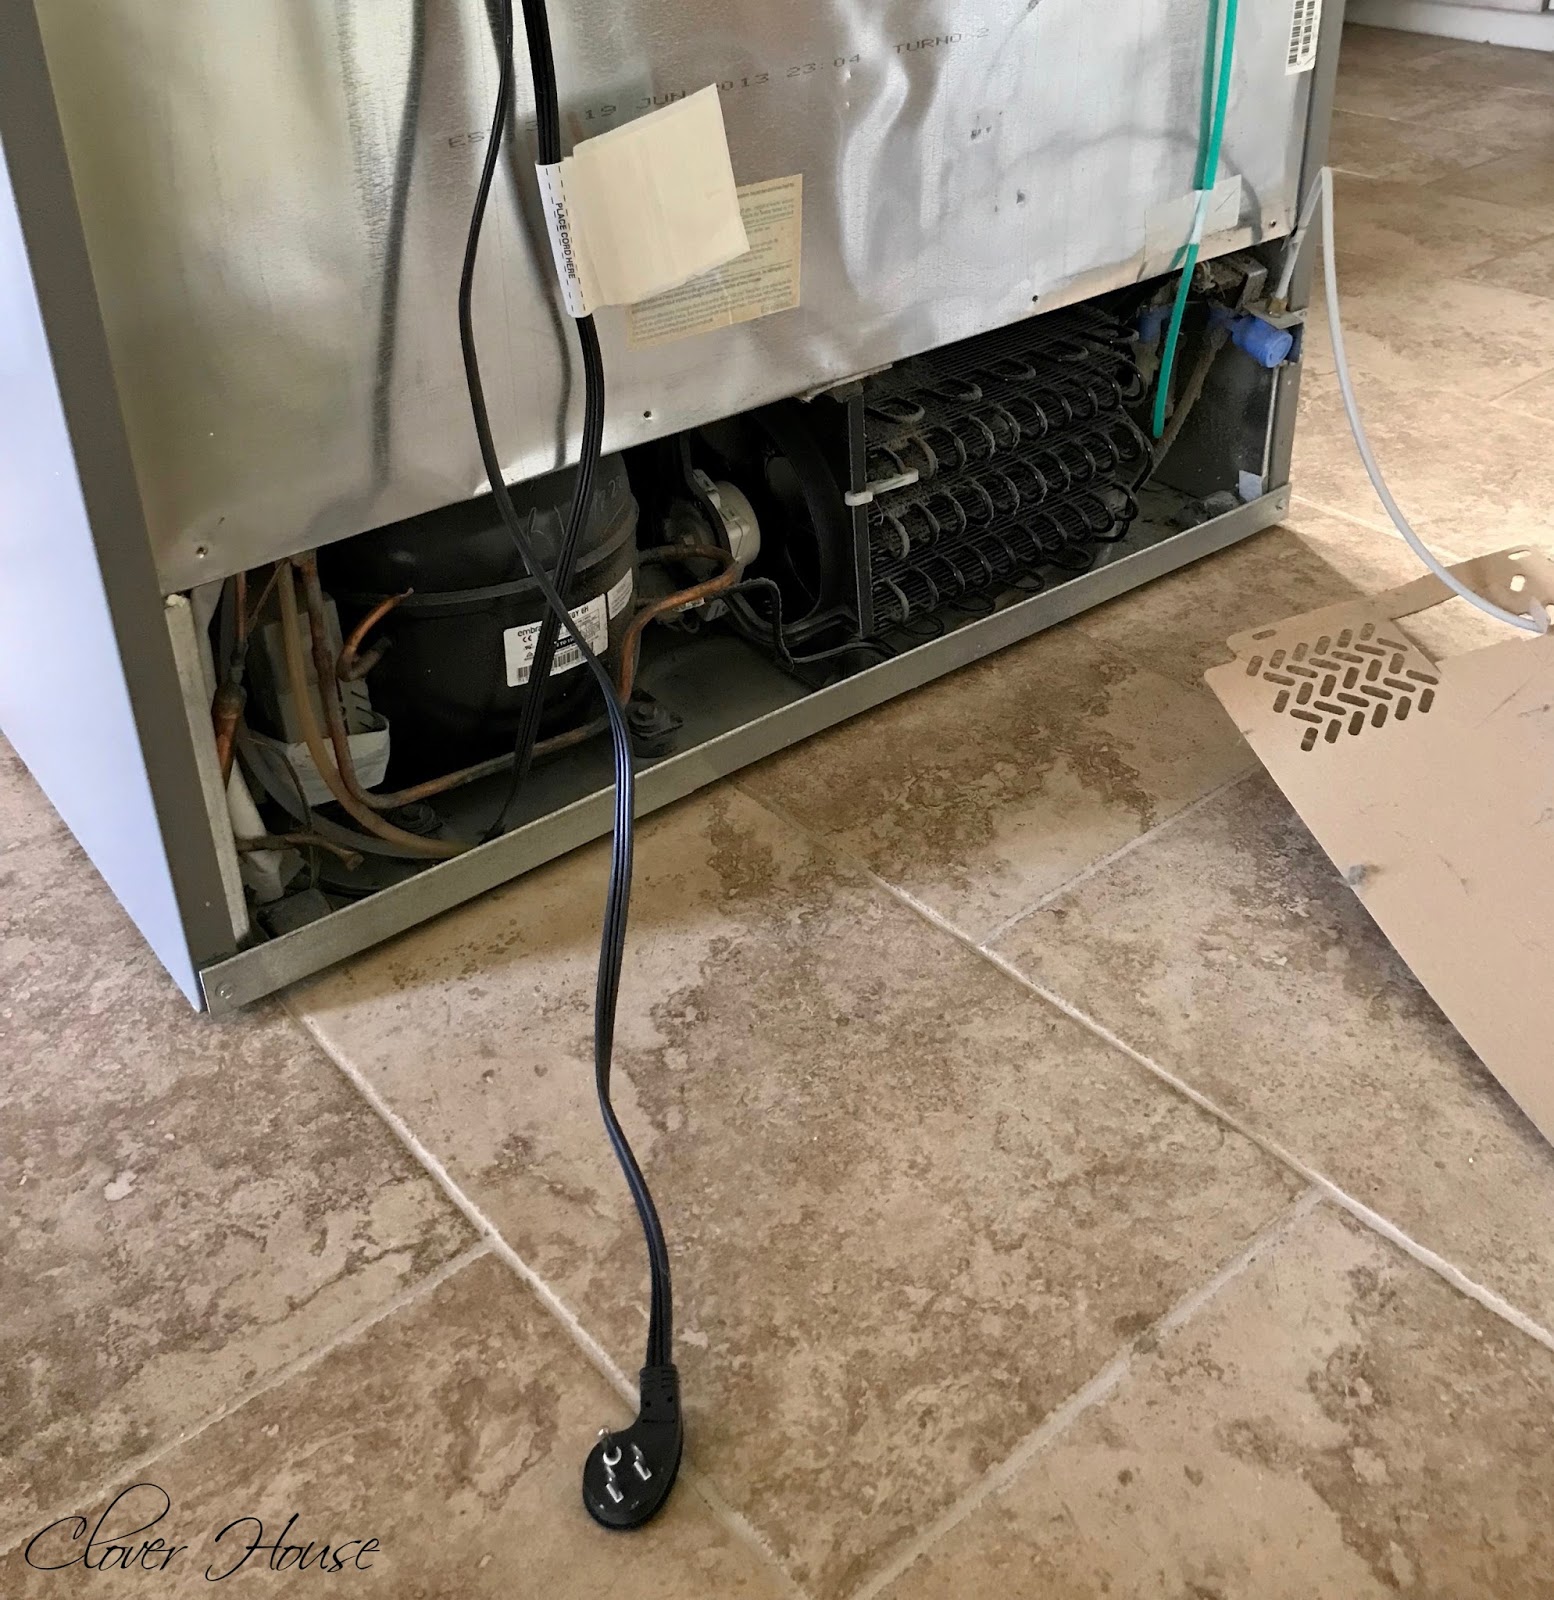 Clover House: How to Clean Your Fridge Coils